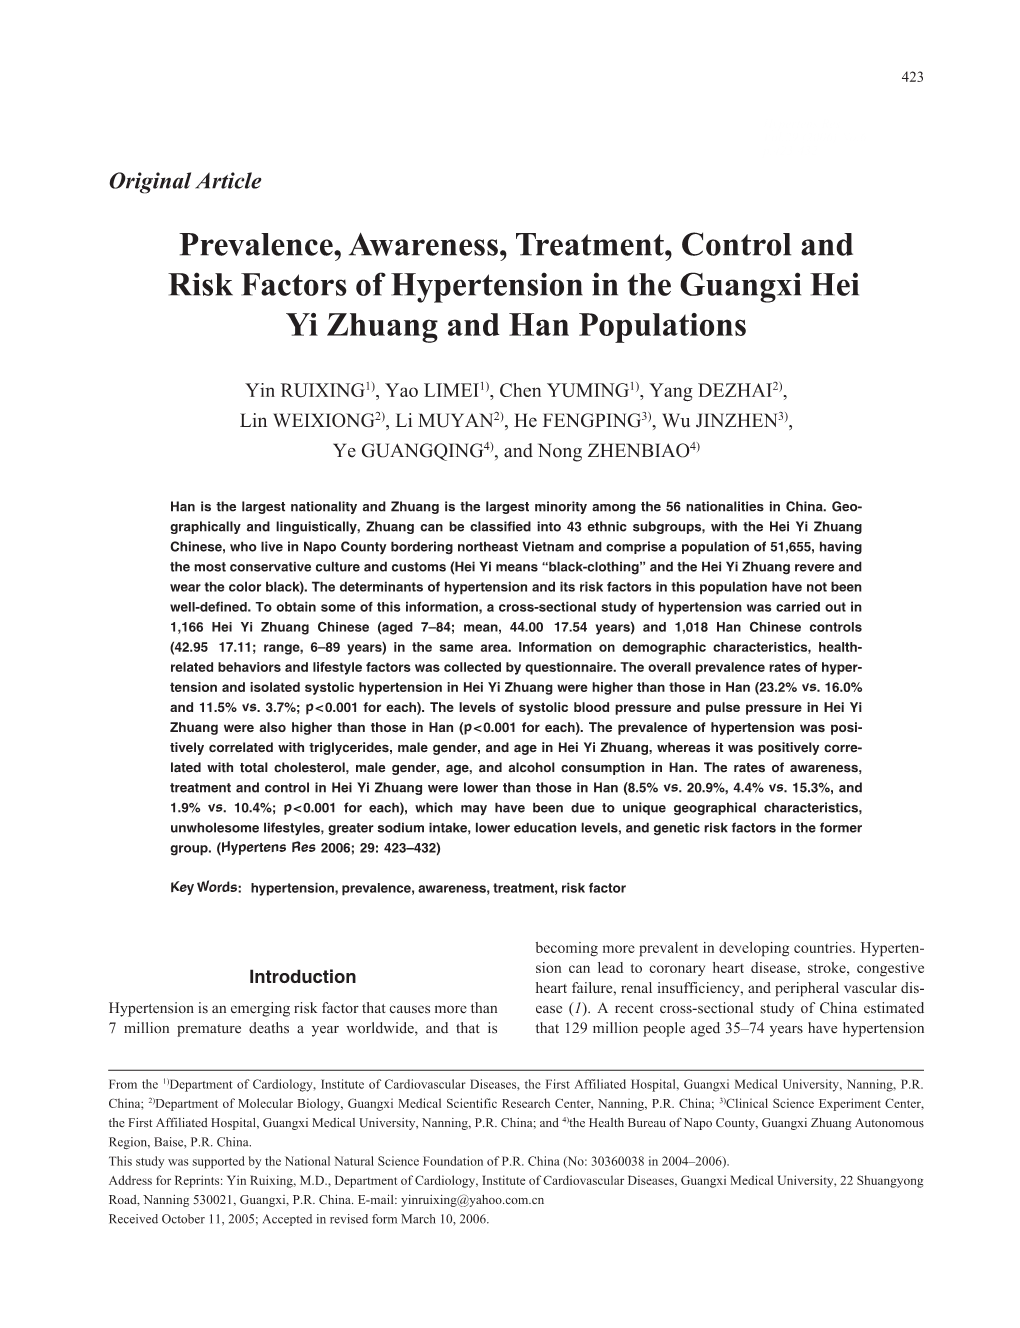 Prevalence, Awareness, Treatment, Control and Risk Factors of Hypertension in the Guangxi Hei Yi Zhuang and Han Populations